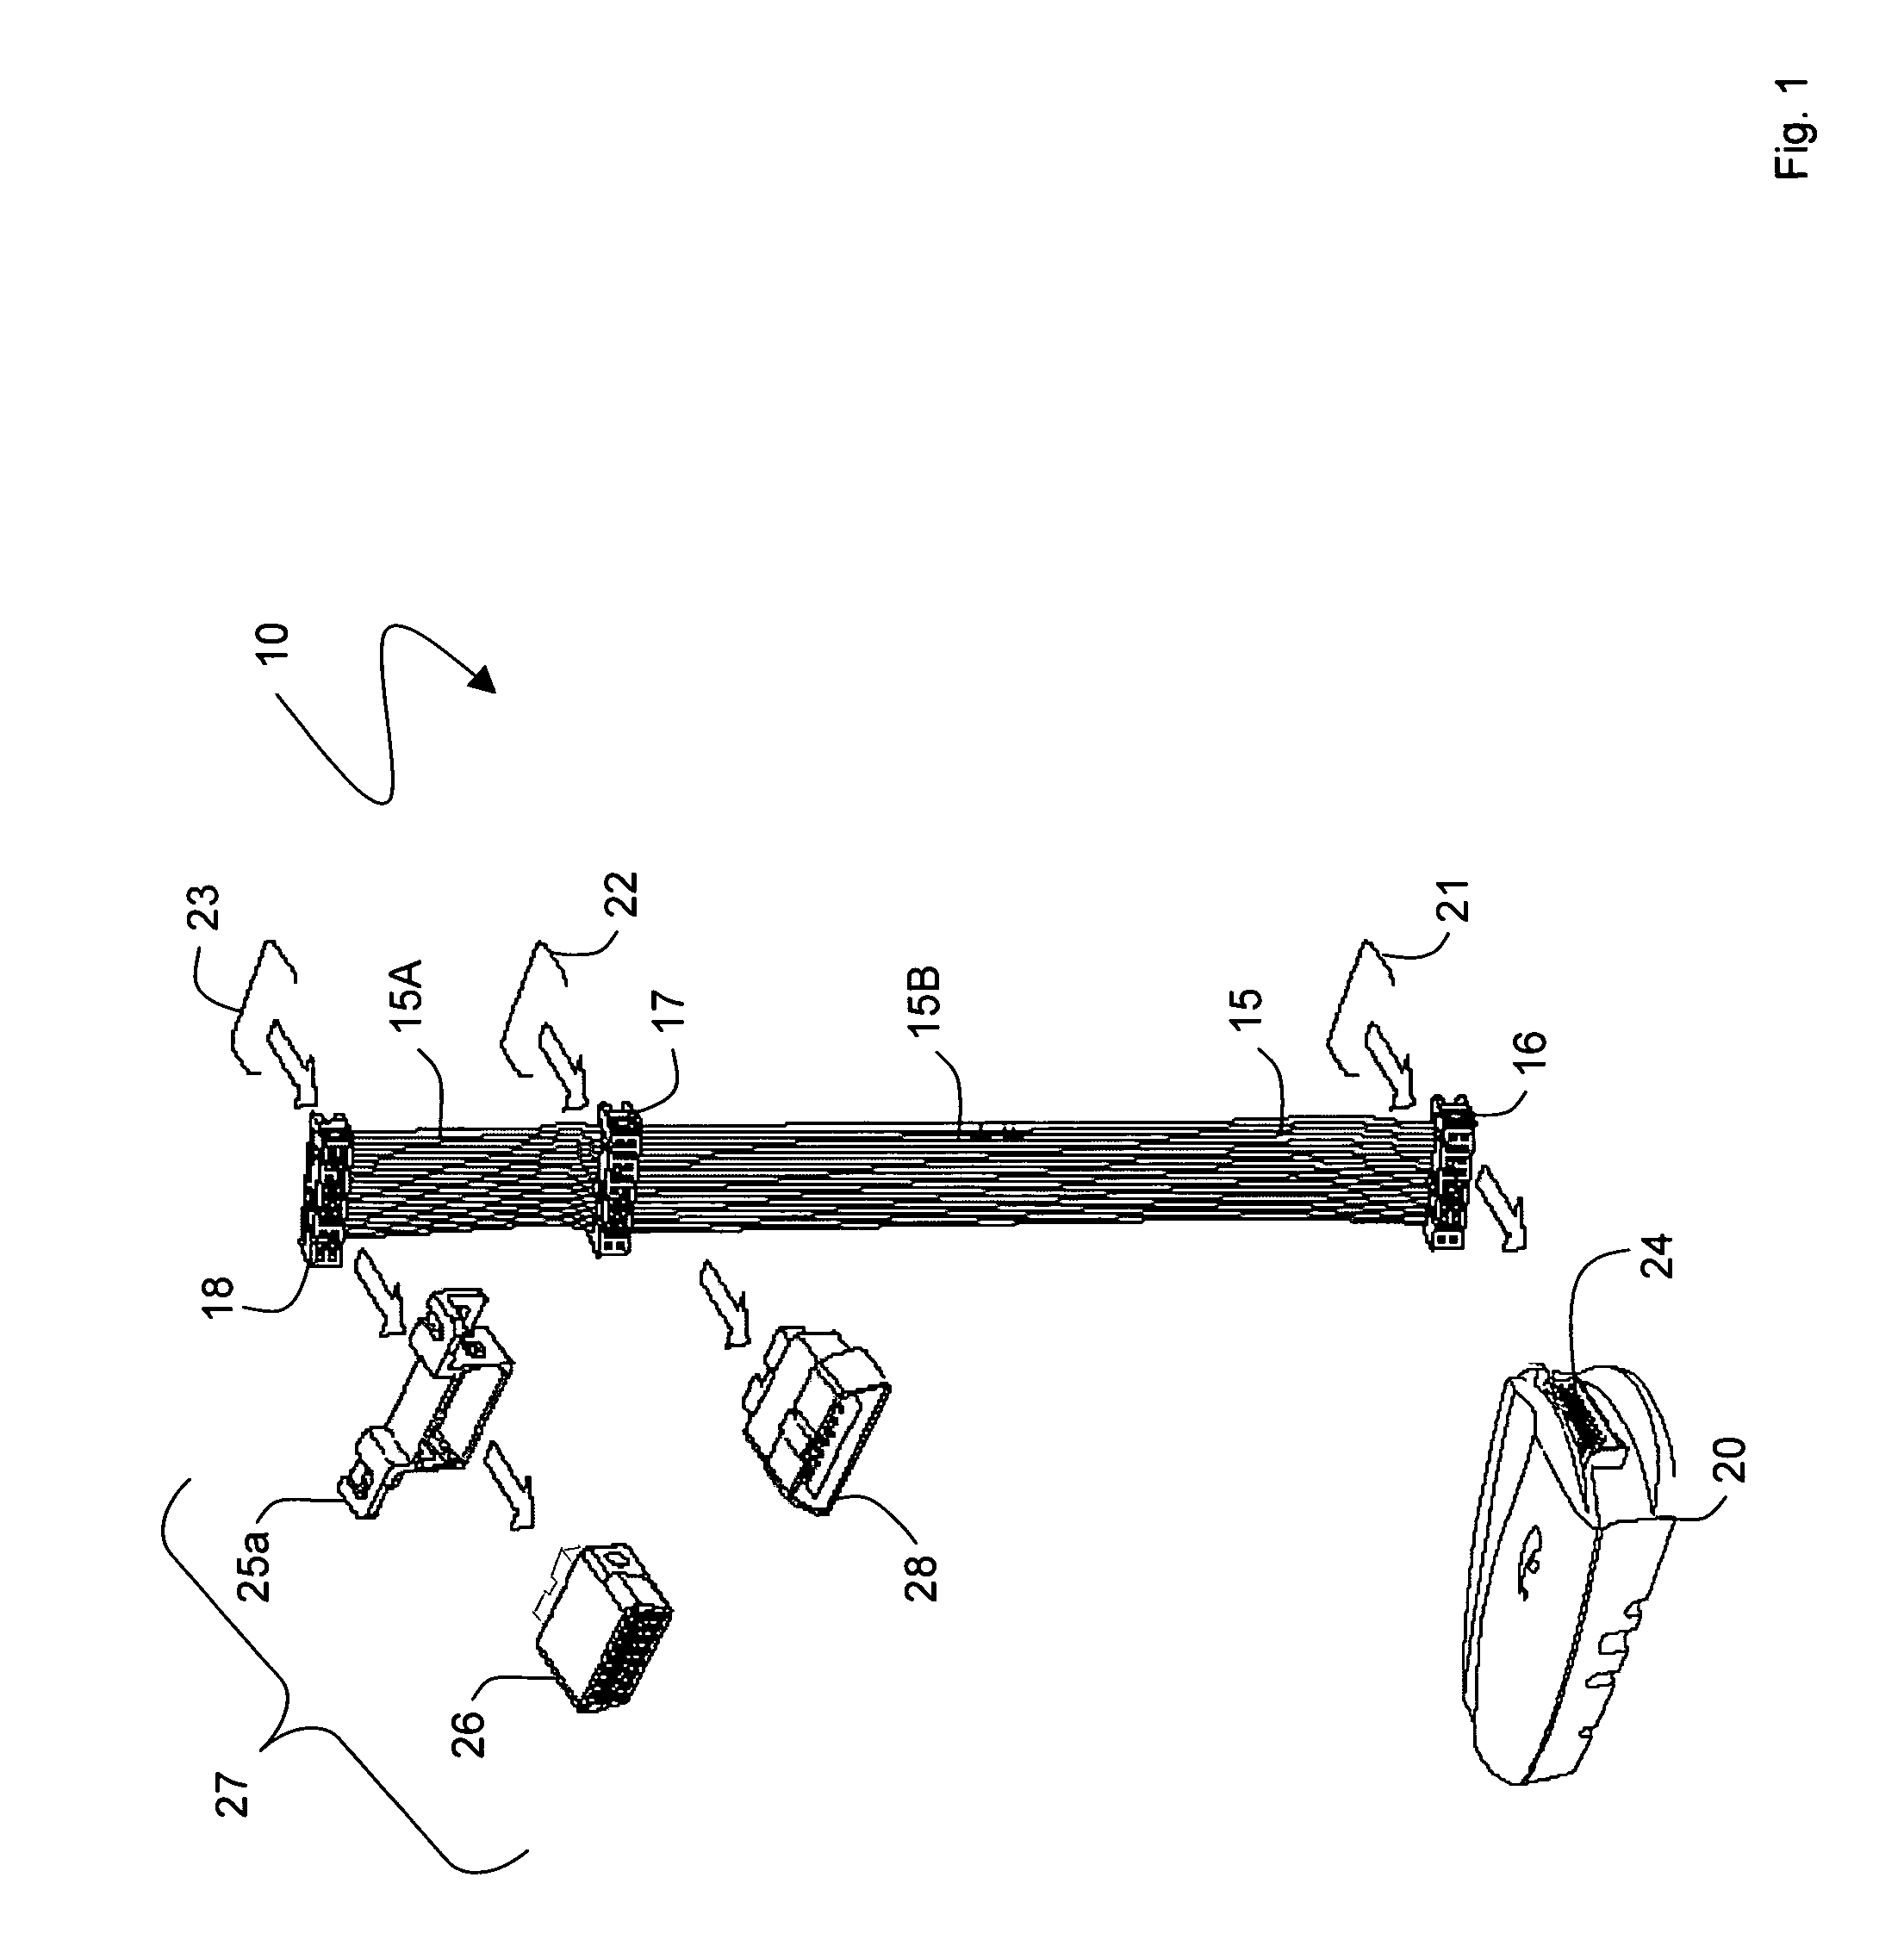 In-vehicle wiring harness with multiple adaptors for an on-board diagnostic connector